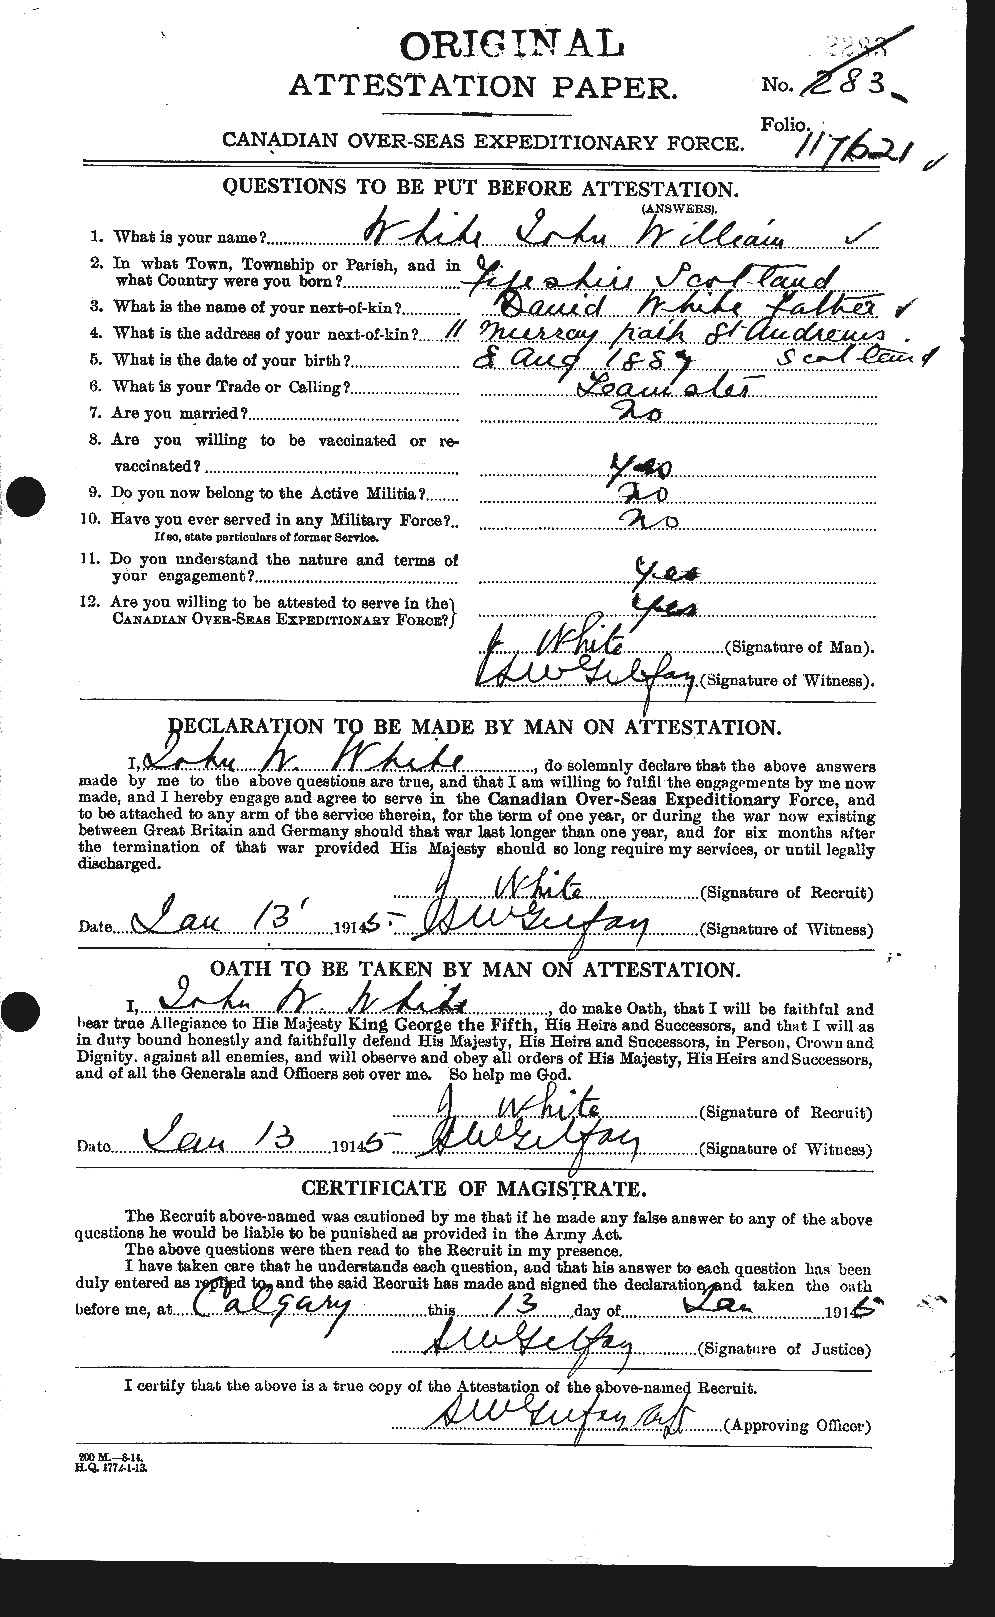 Personnel Records of the First World War - CEF 671616a